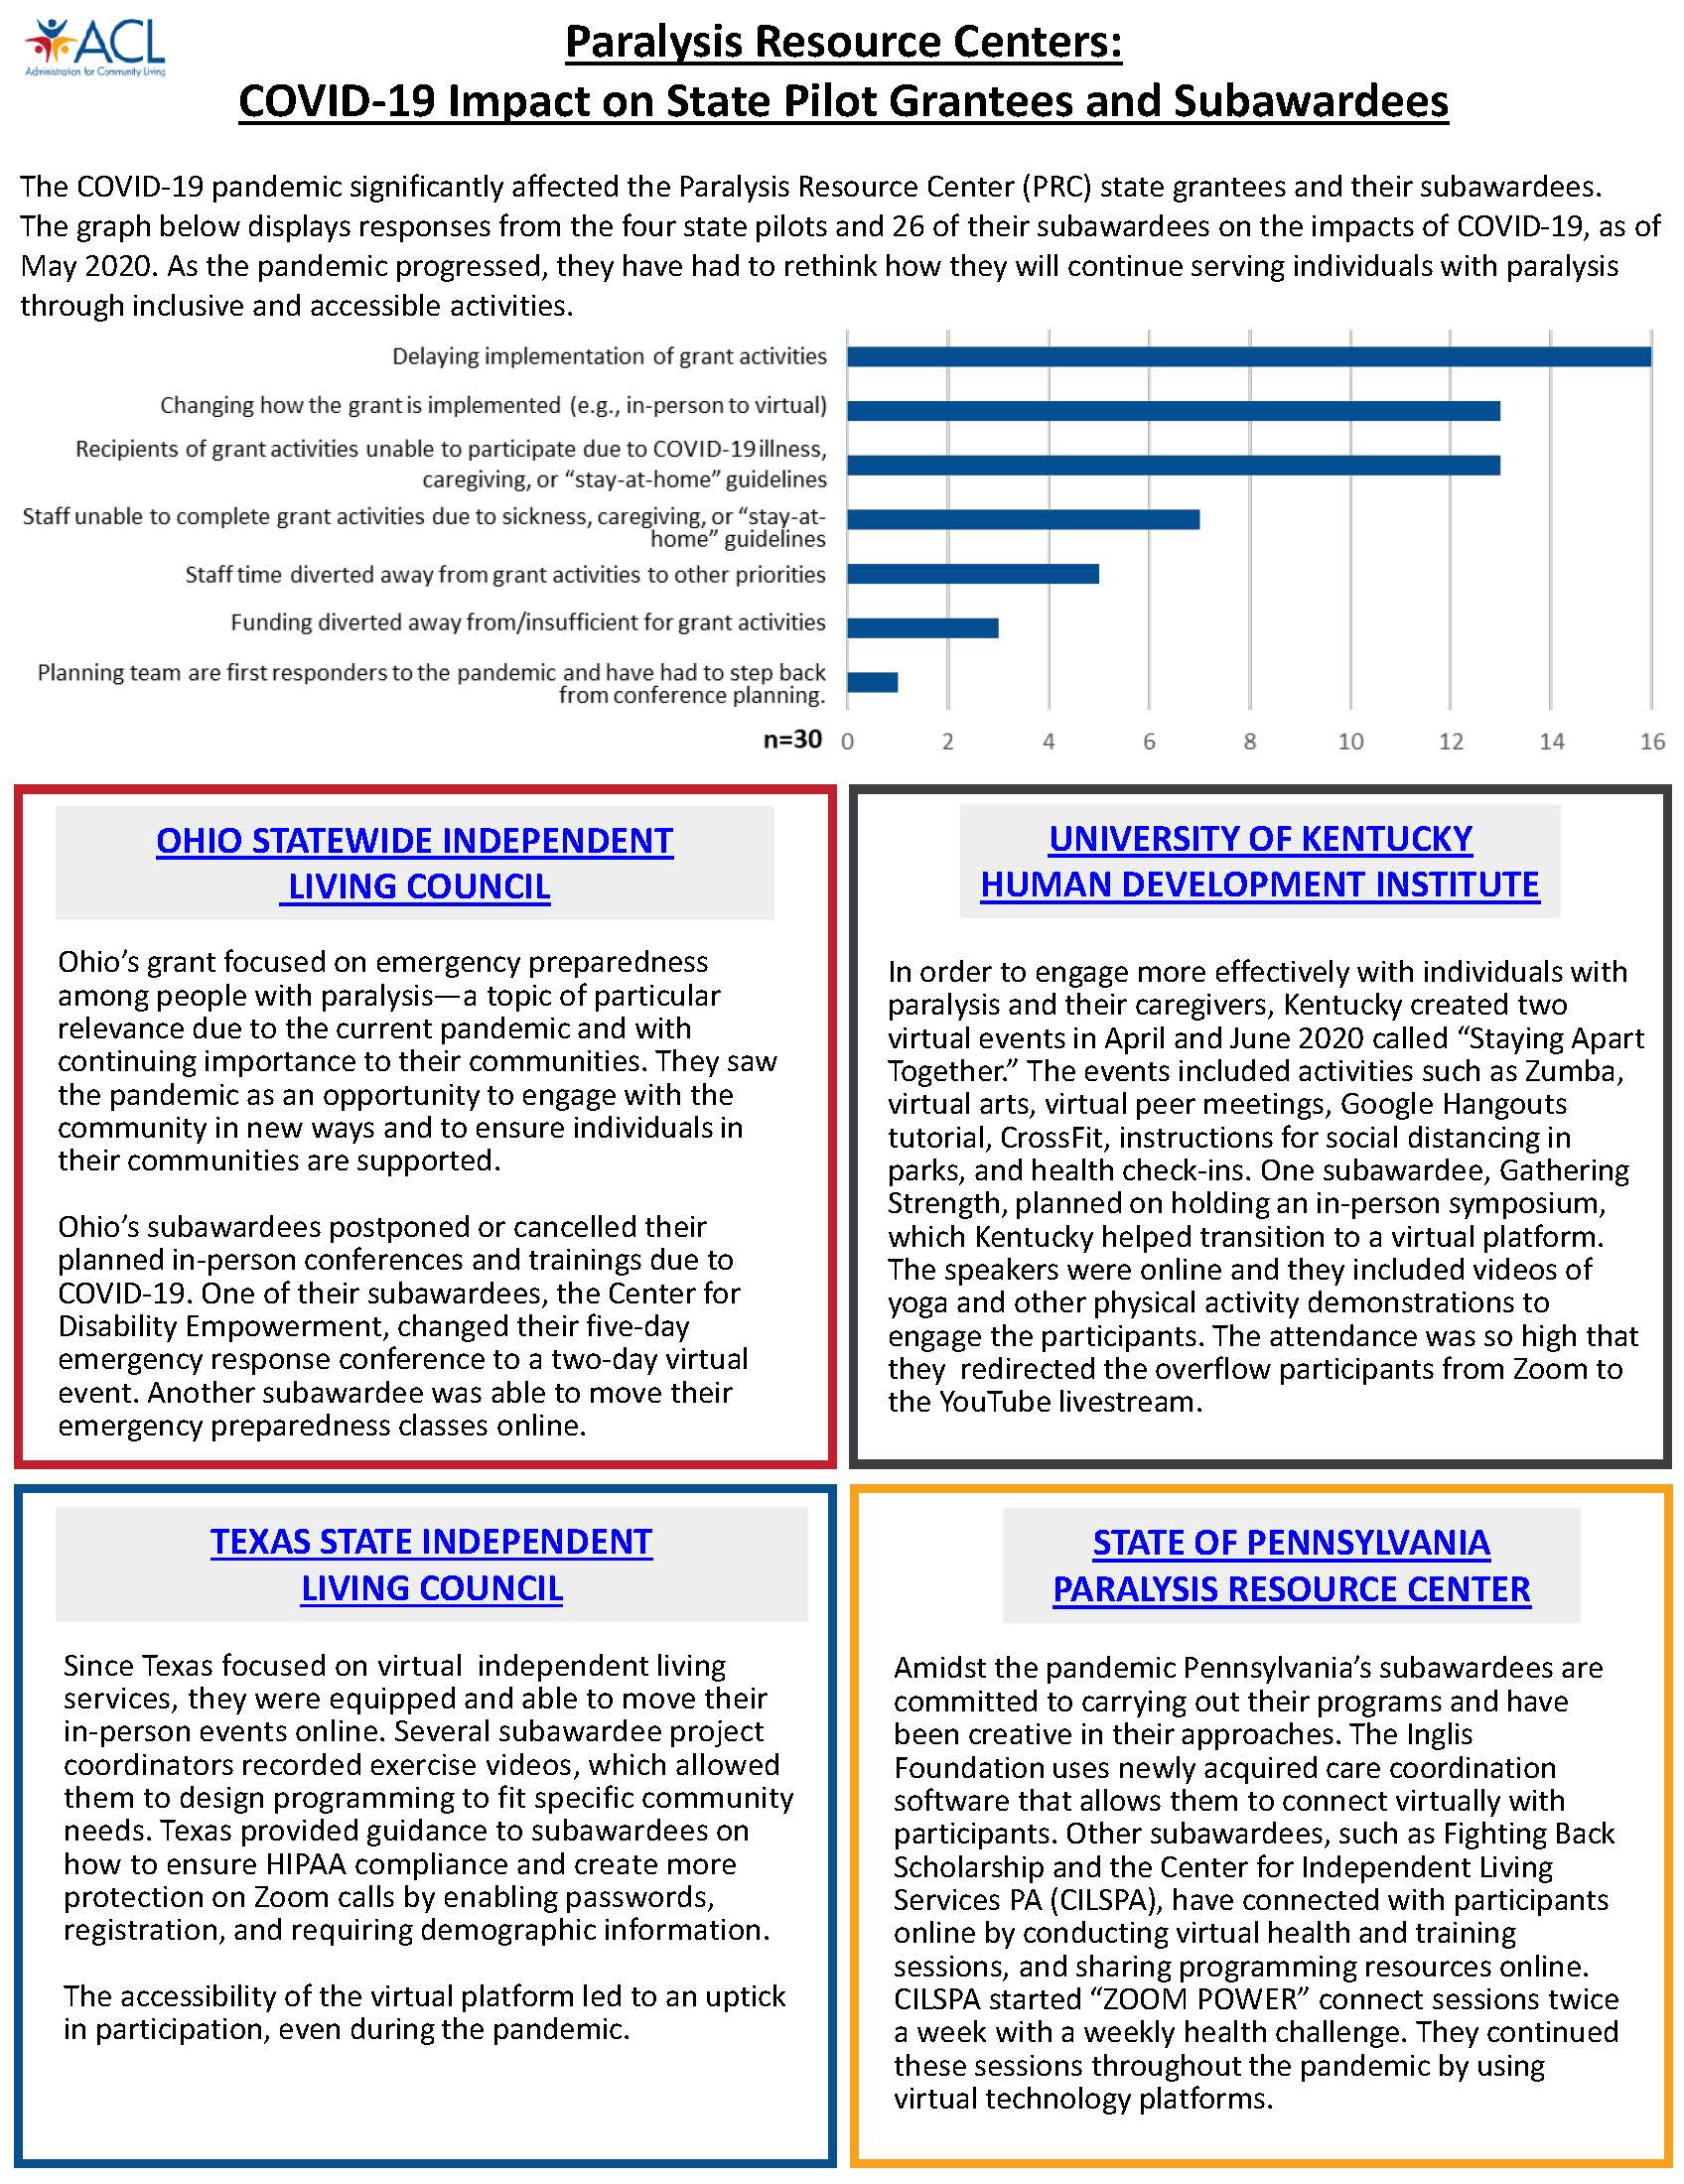 PRC COVID Impact One-Pager